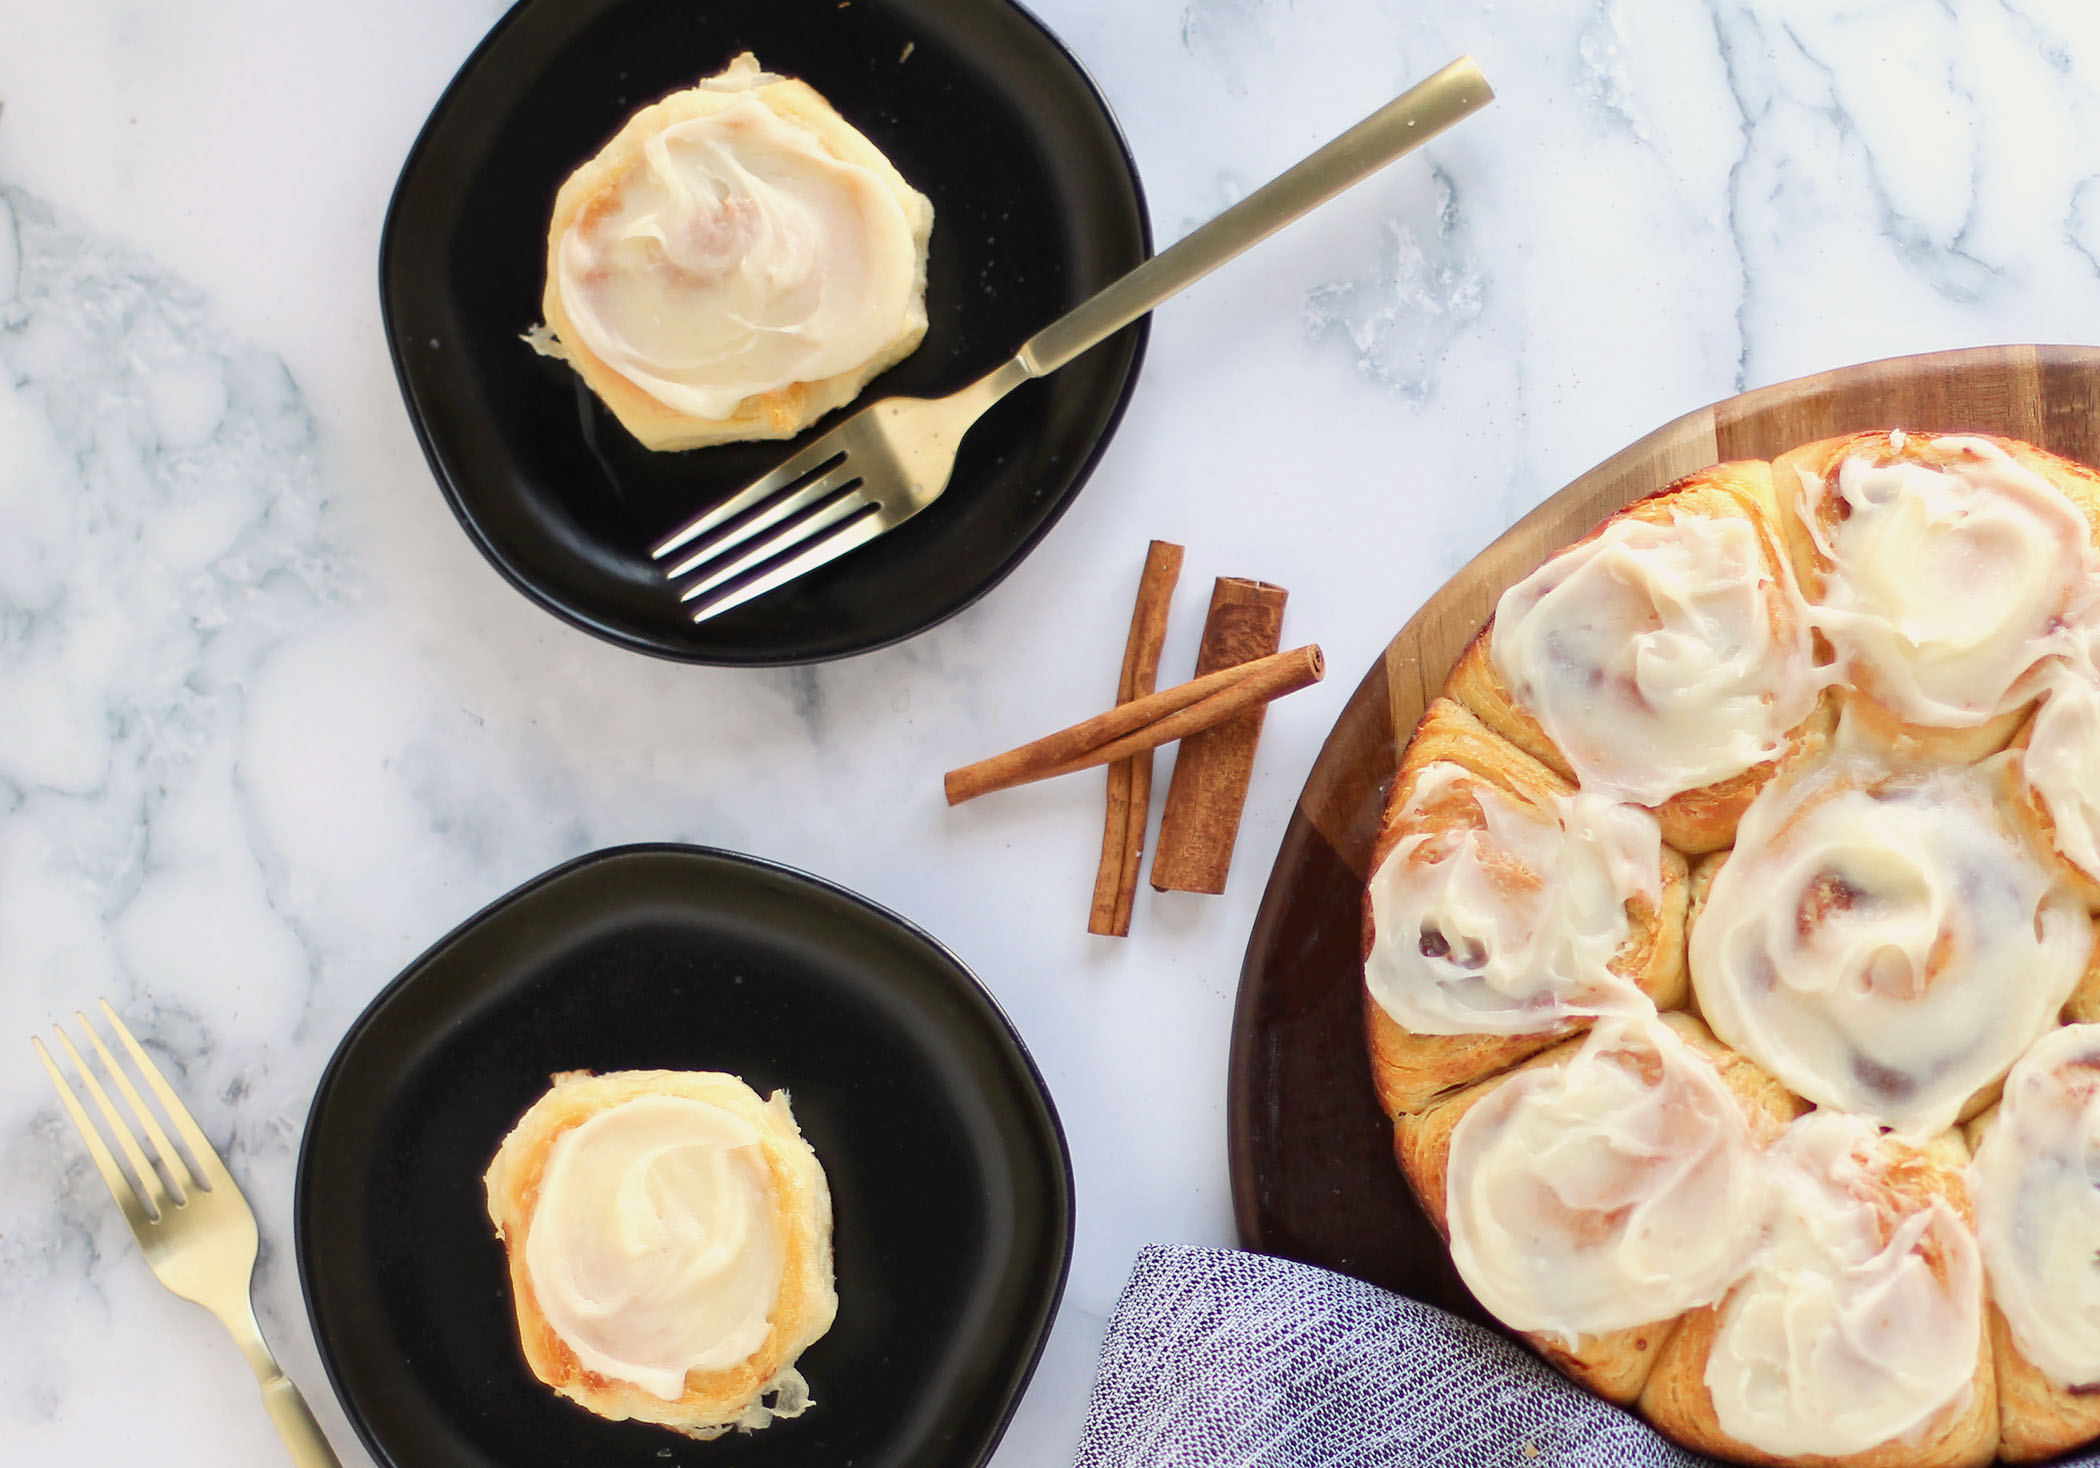 Cinnamon Pastry Rolls together on a serving platter with individual rolls on plates. Cinnamon sticks used as garnish.